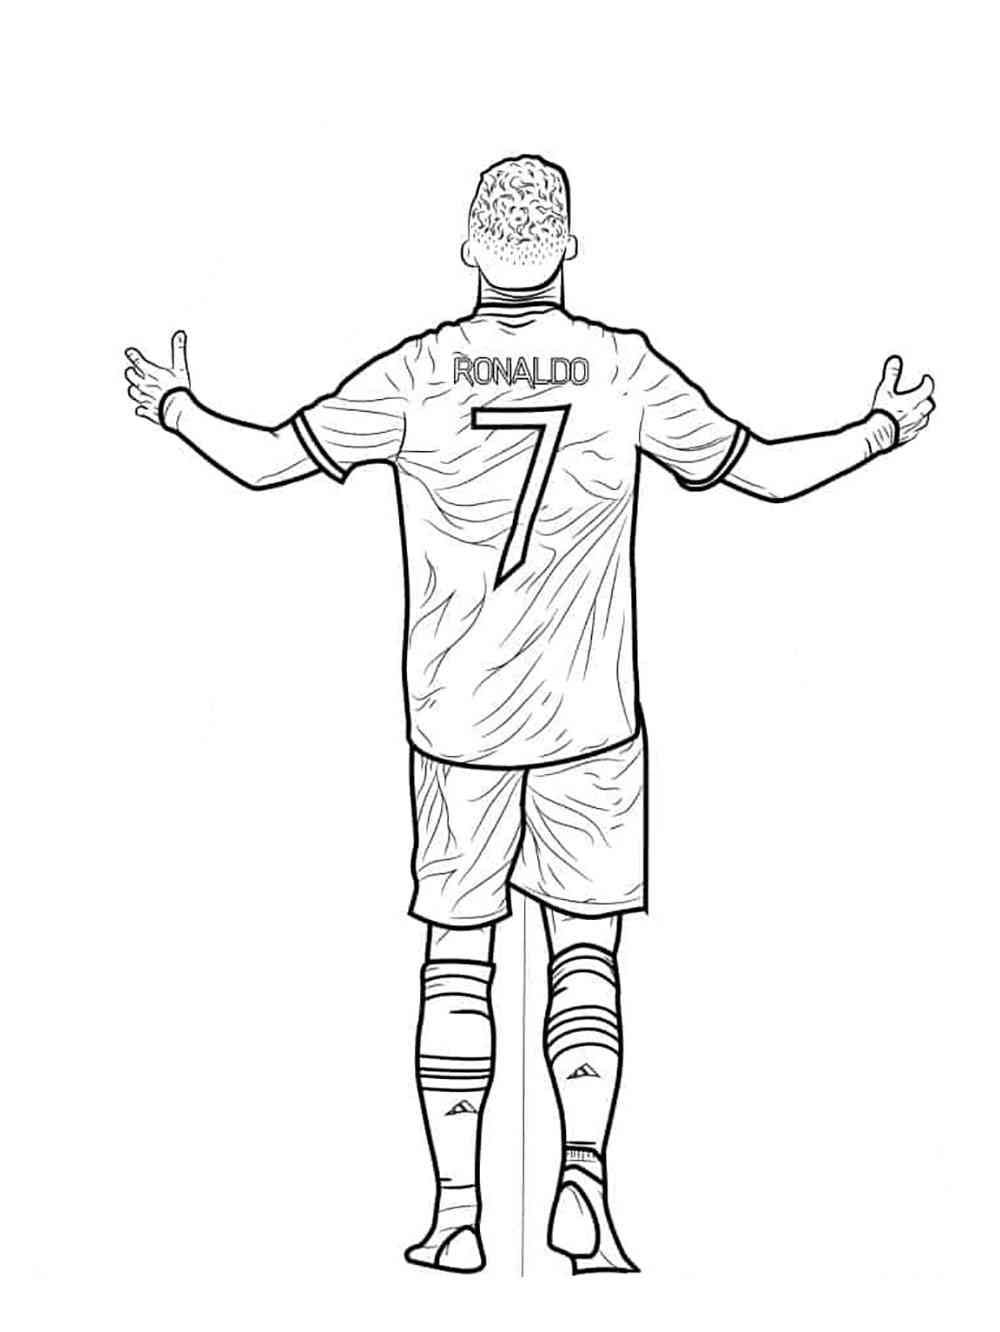 Cristiano ronaldo coloring pages